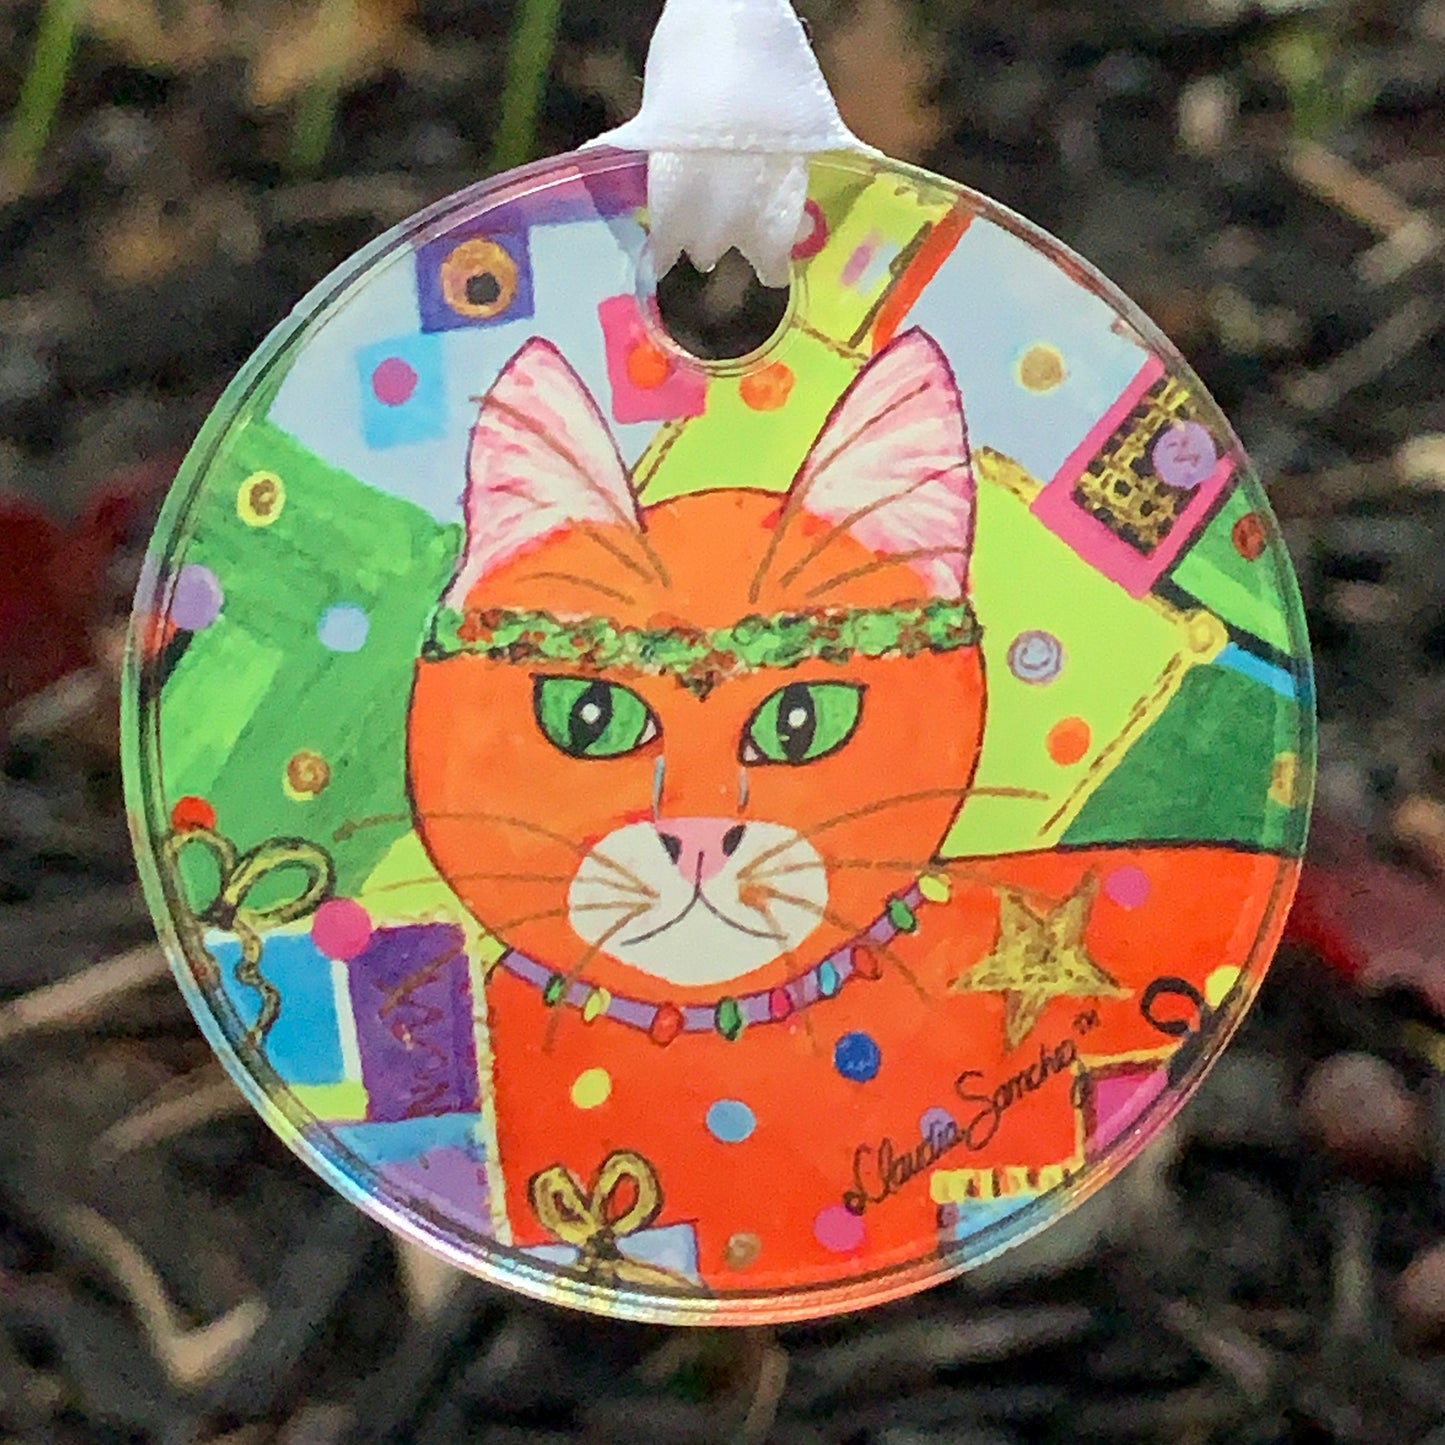 Christmas in Orange Acrylic Cat Art Christmas Ornament by Claudia Sanchez, Claudia's Cats Collection